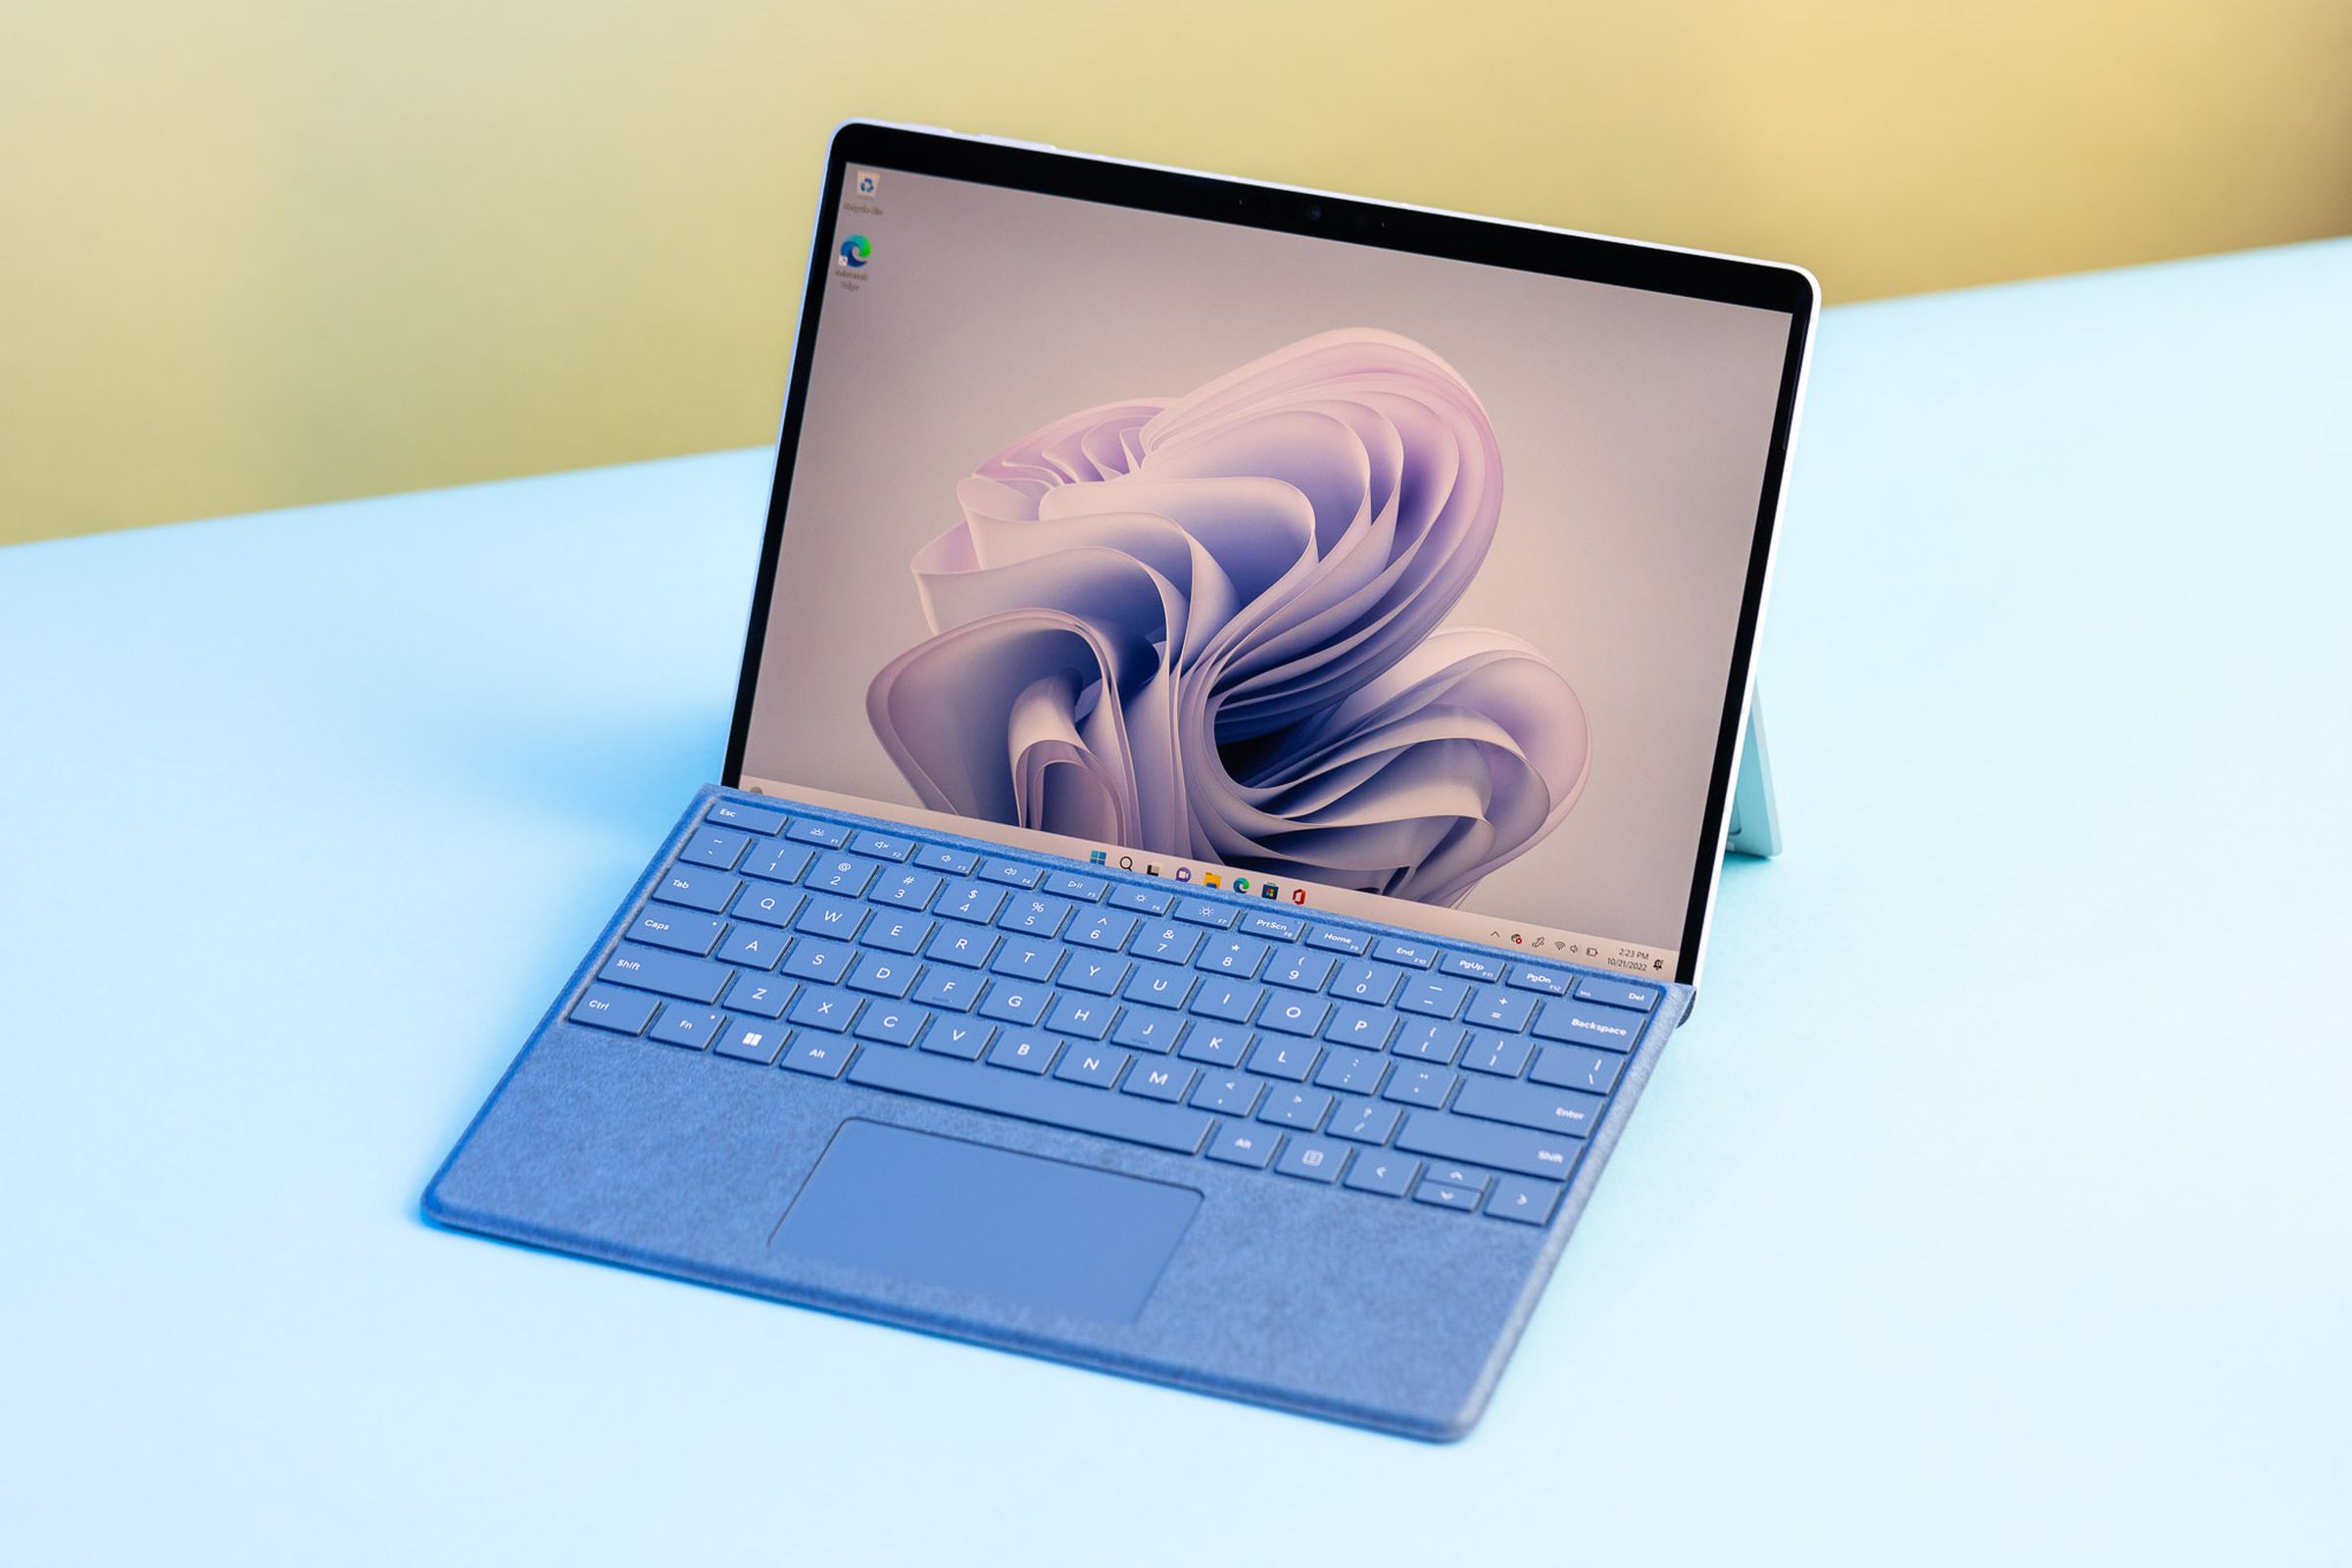 The Surface Pro 9 in laptop mode seen from above. The screen displays a desktop background with a light blue ribbon.